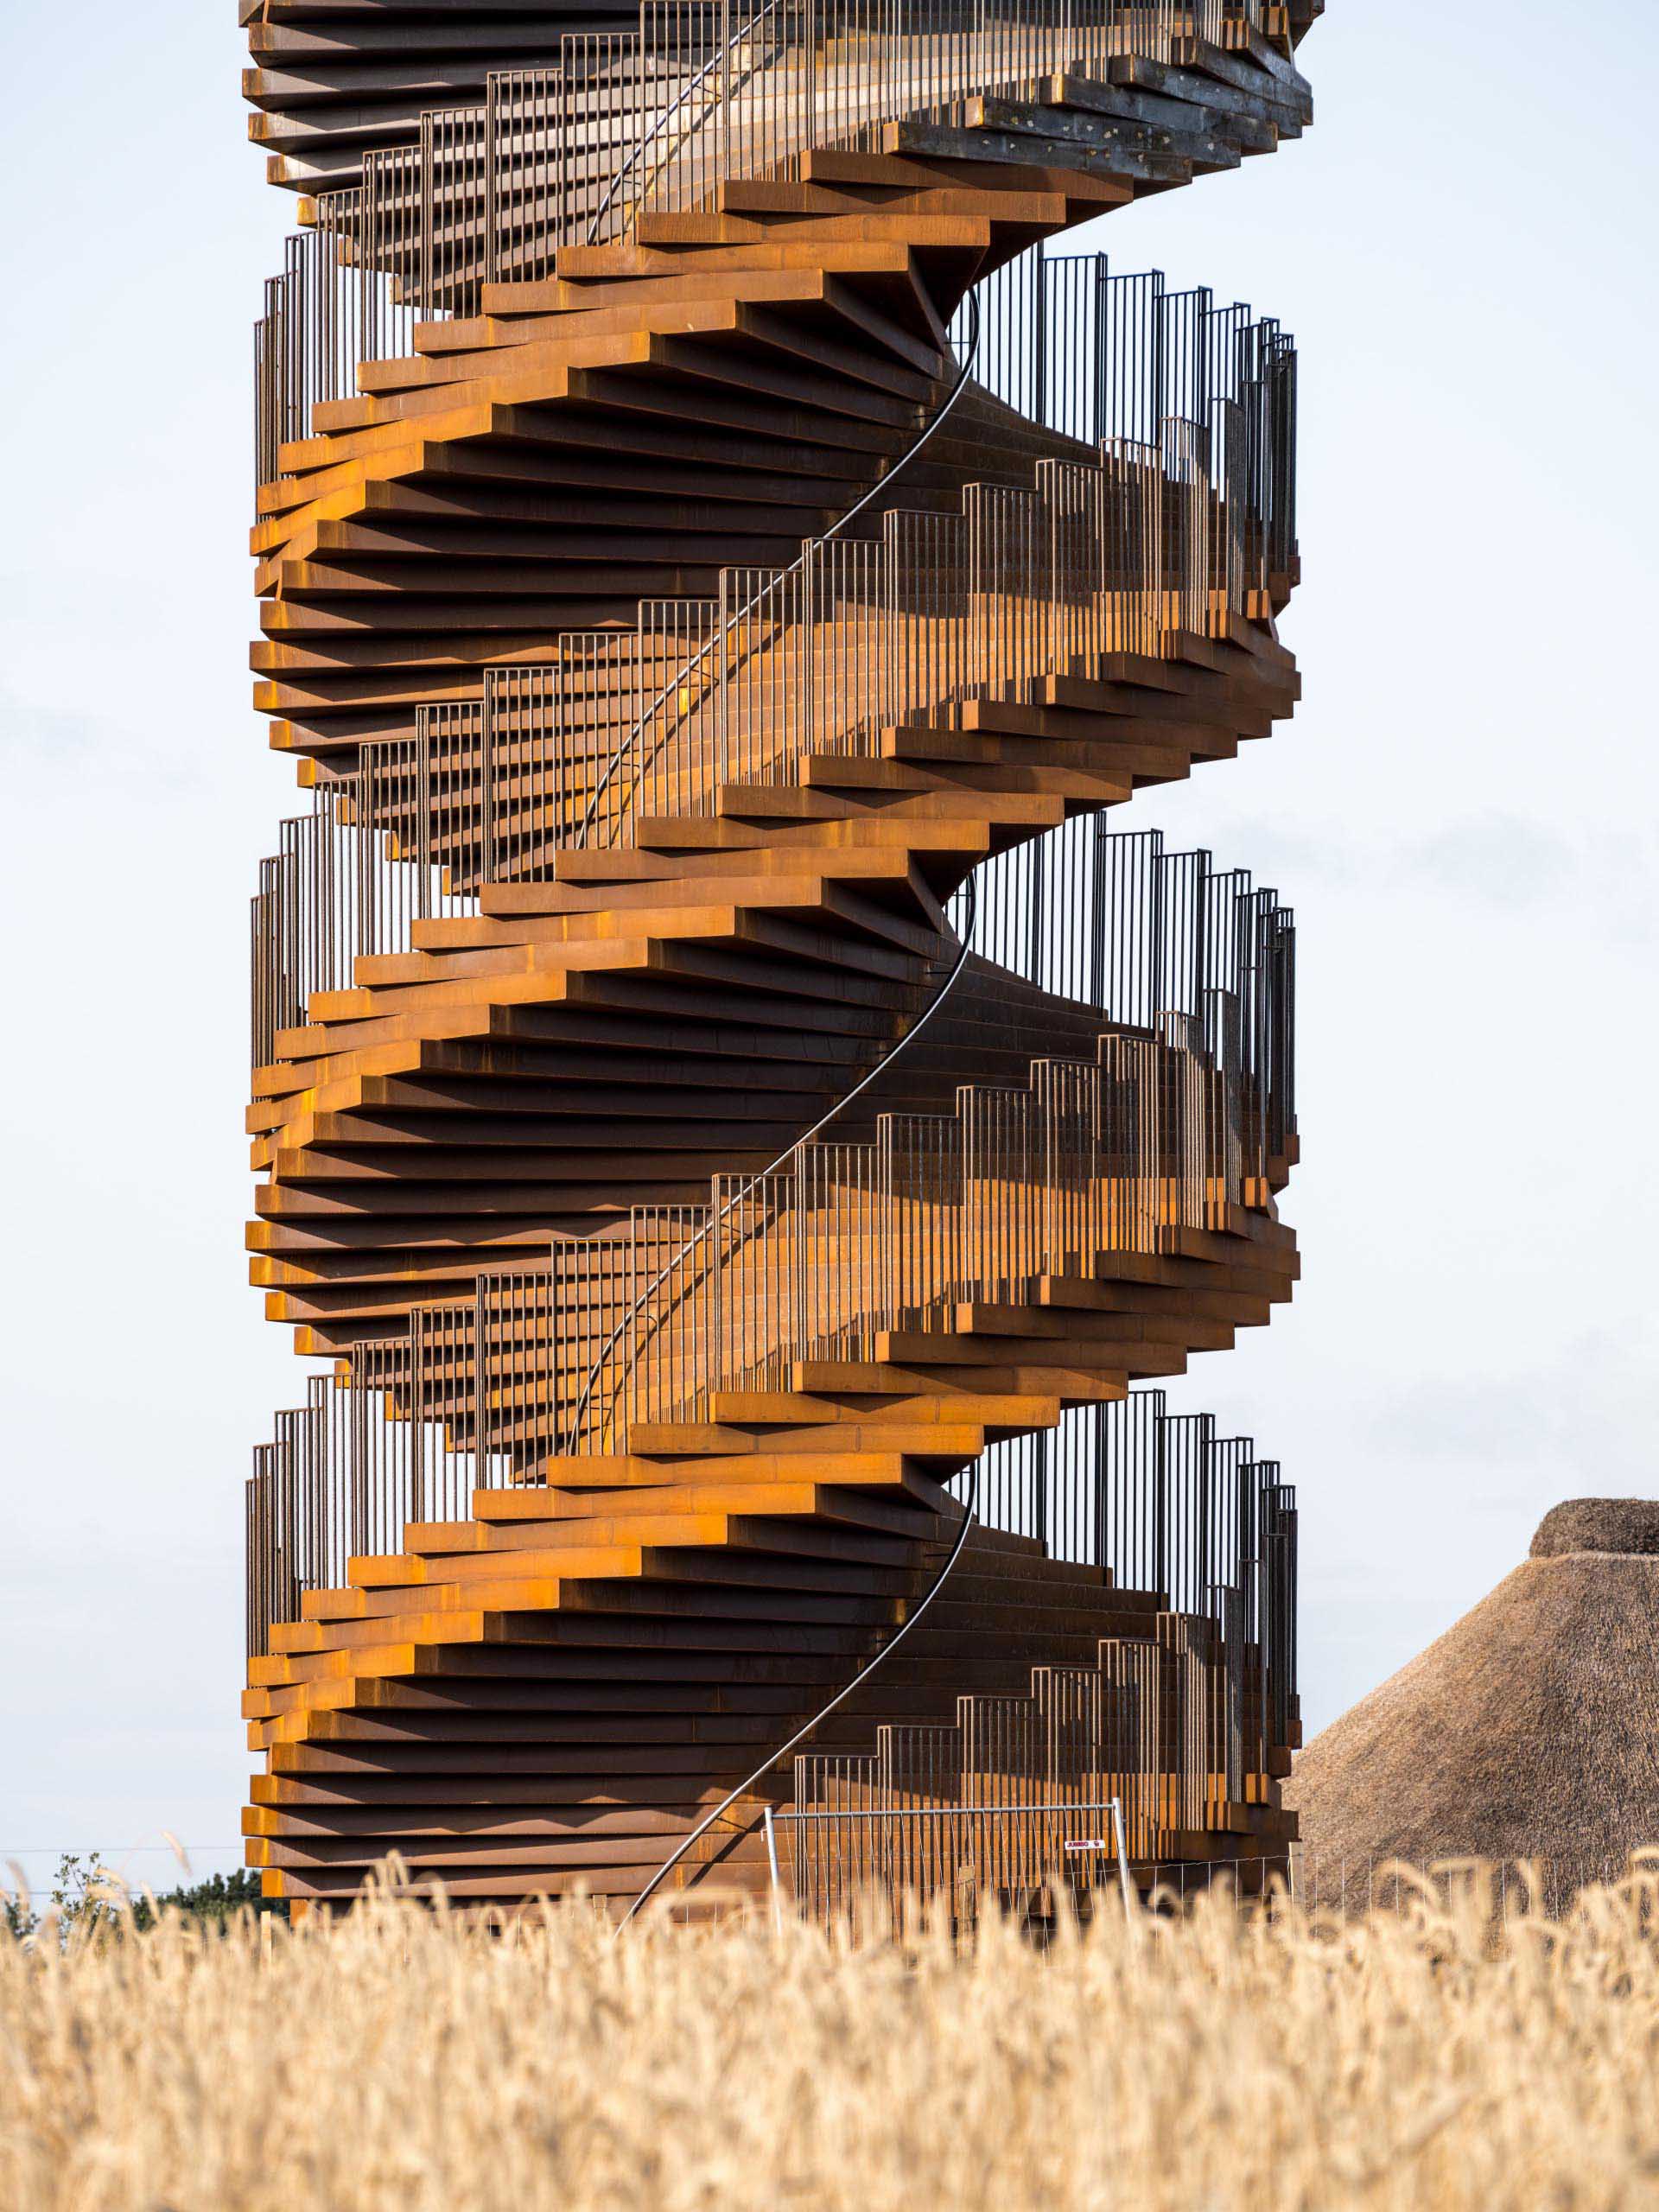 A new spiraling lookout tower in Denmark made from weathered steel.